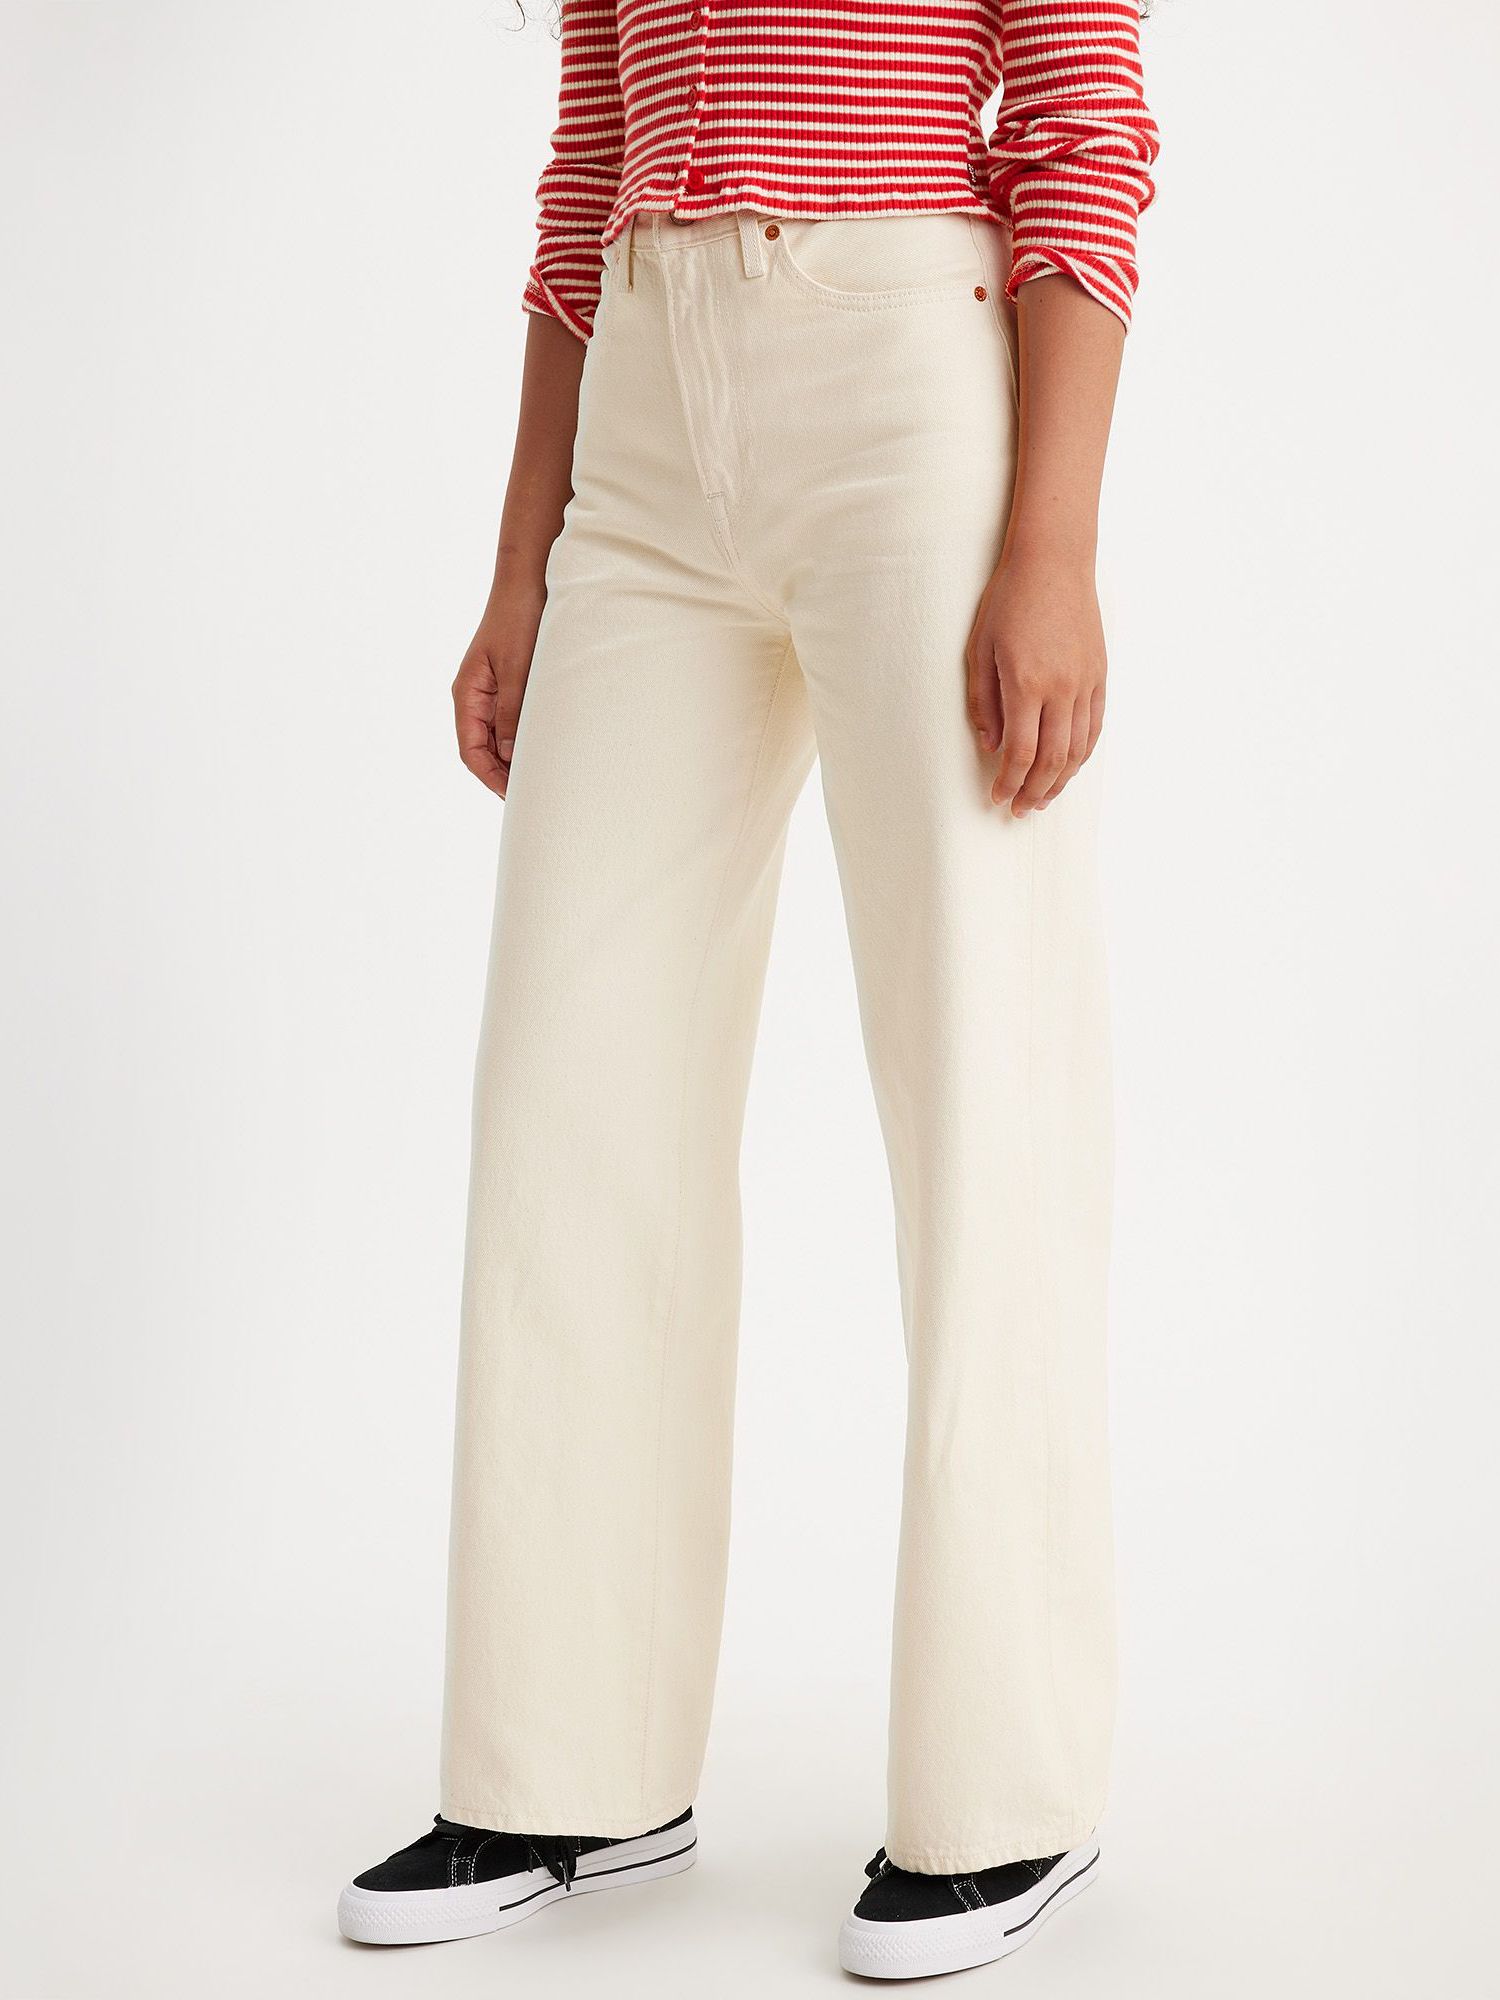 Buy Levi's Ribcage Wide Leg Jeans, Barely Freezing Online at johnlewis.com